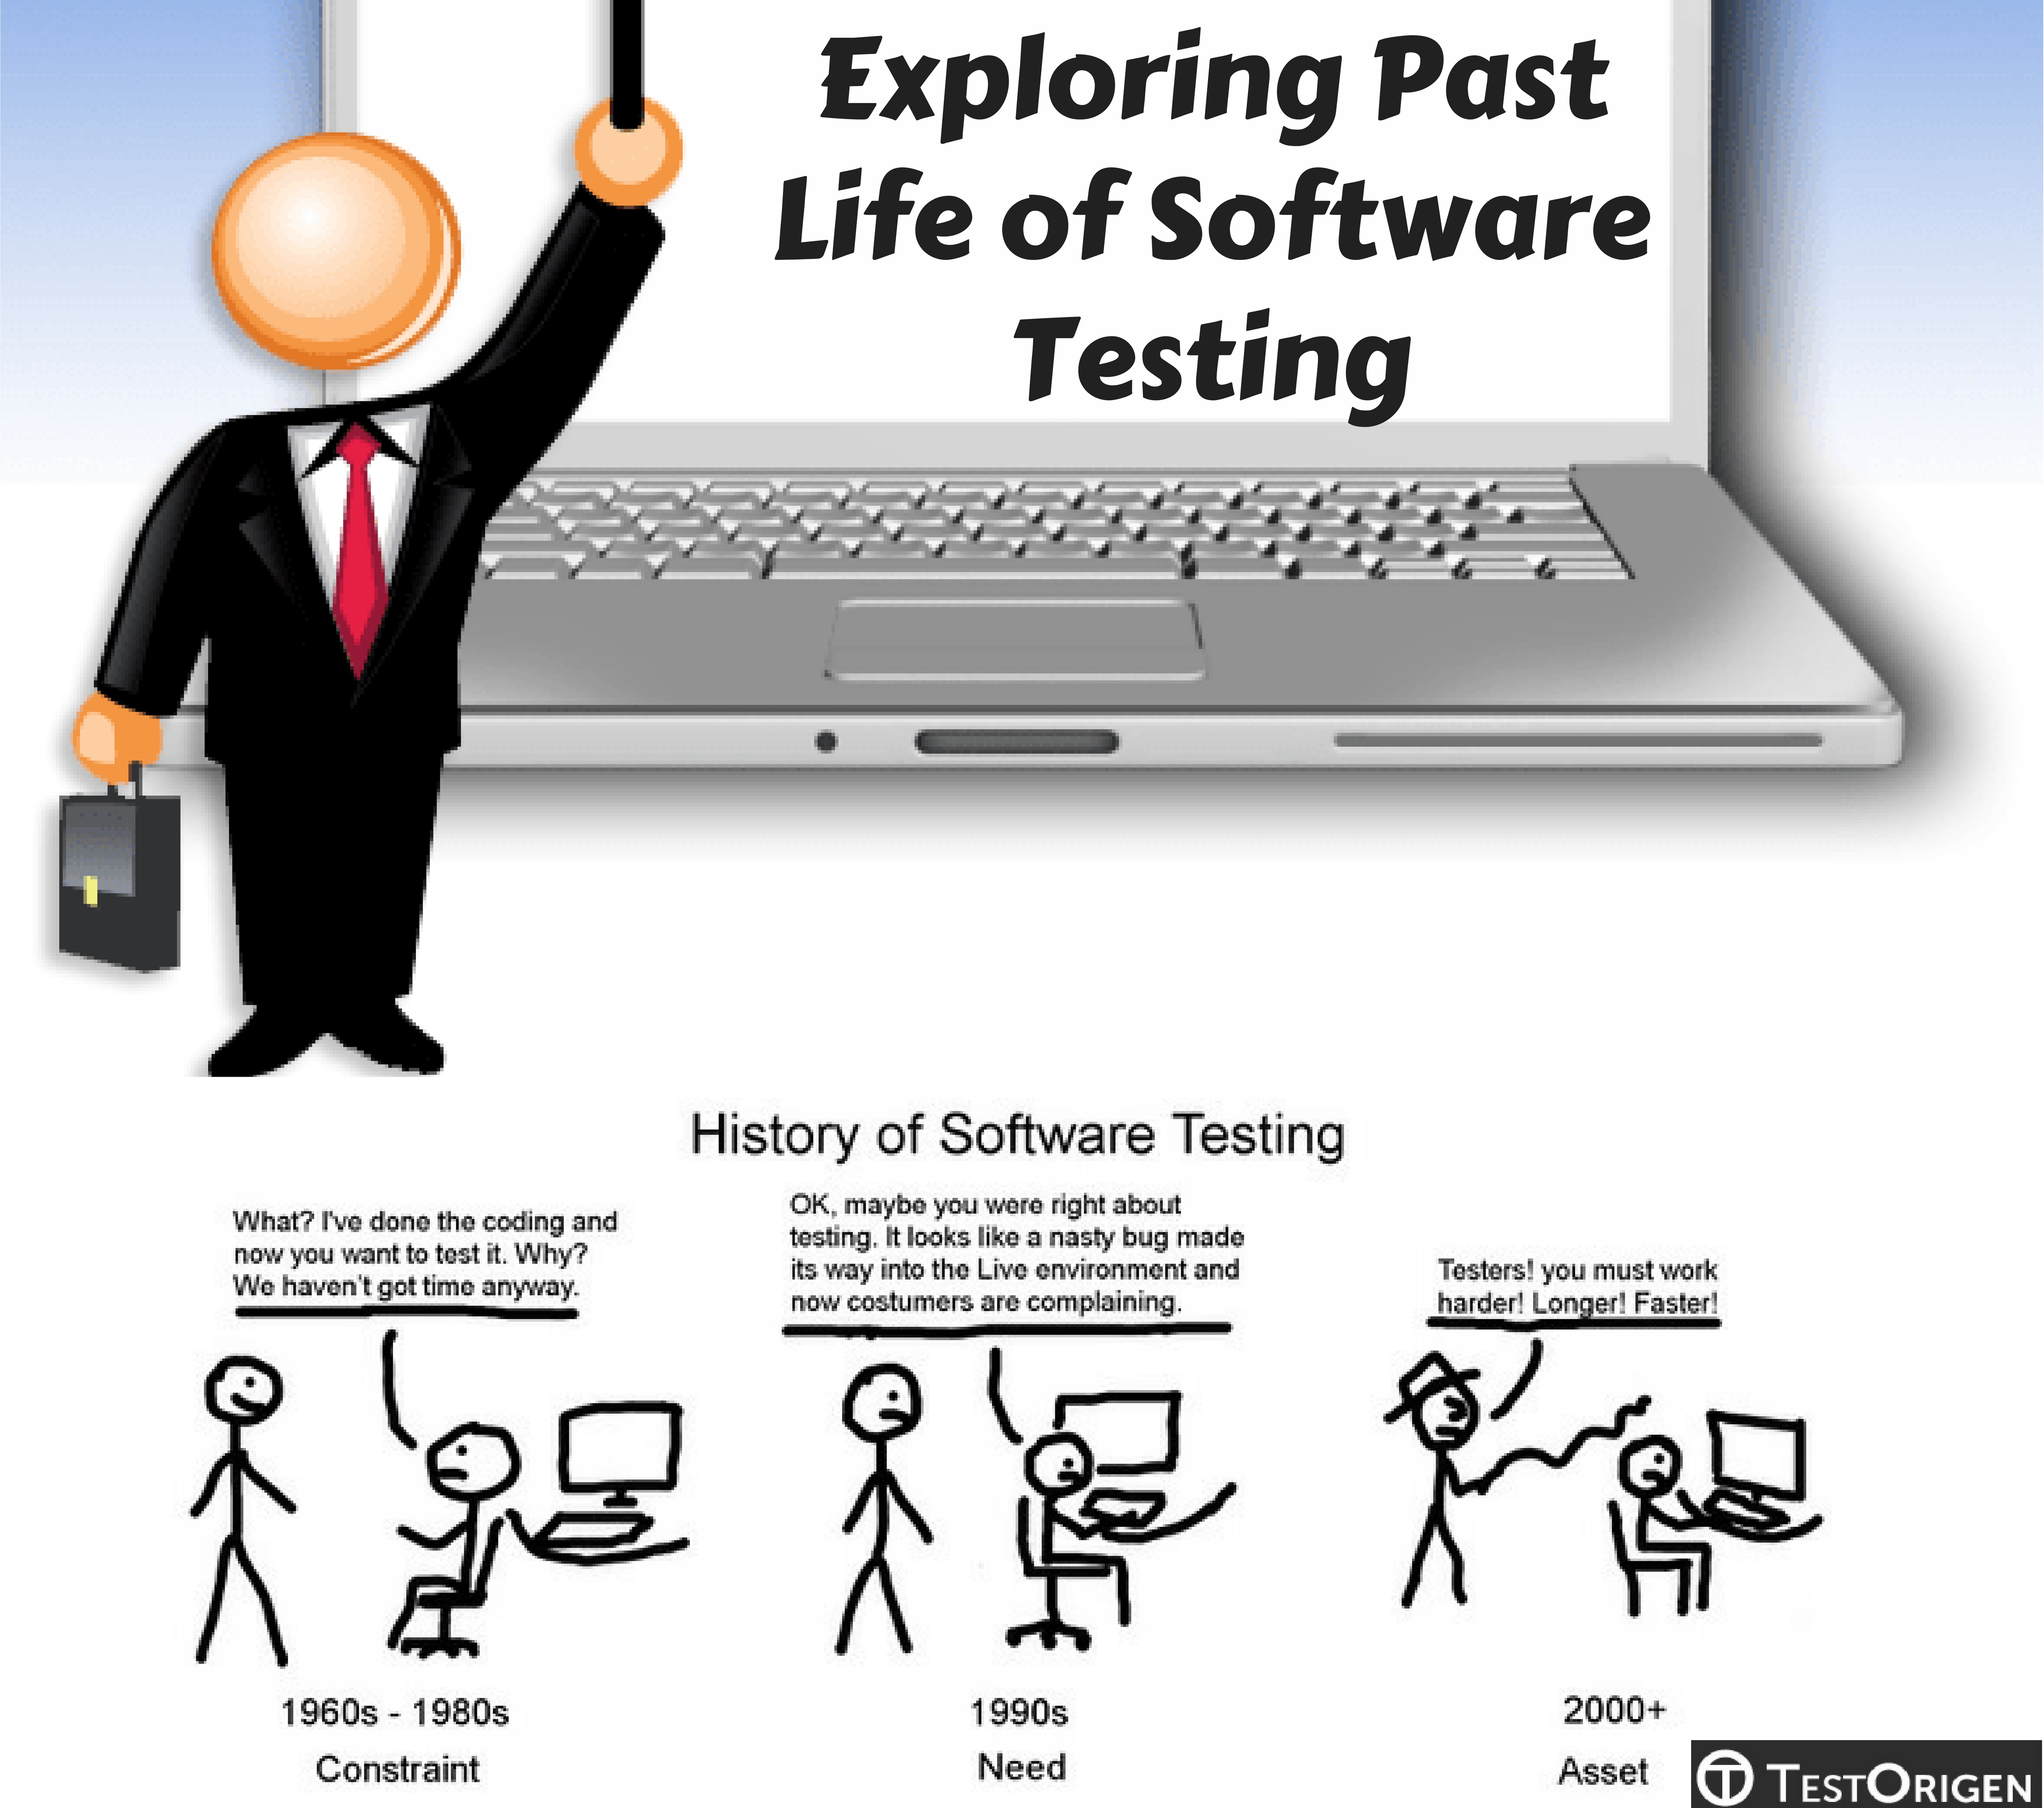 Exploring Past Life of Software Testing